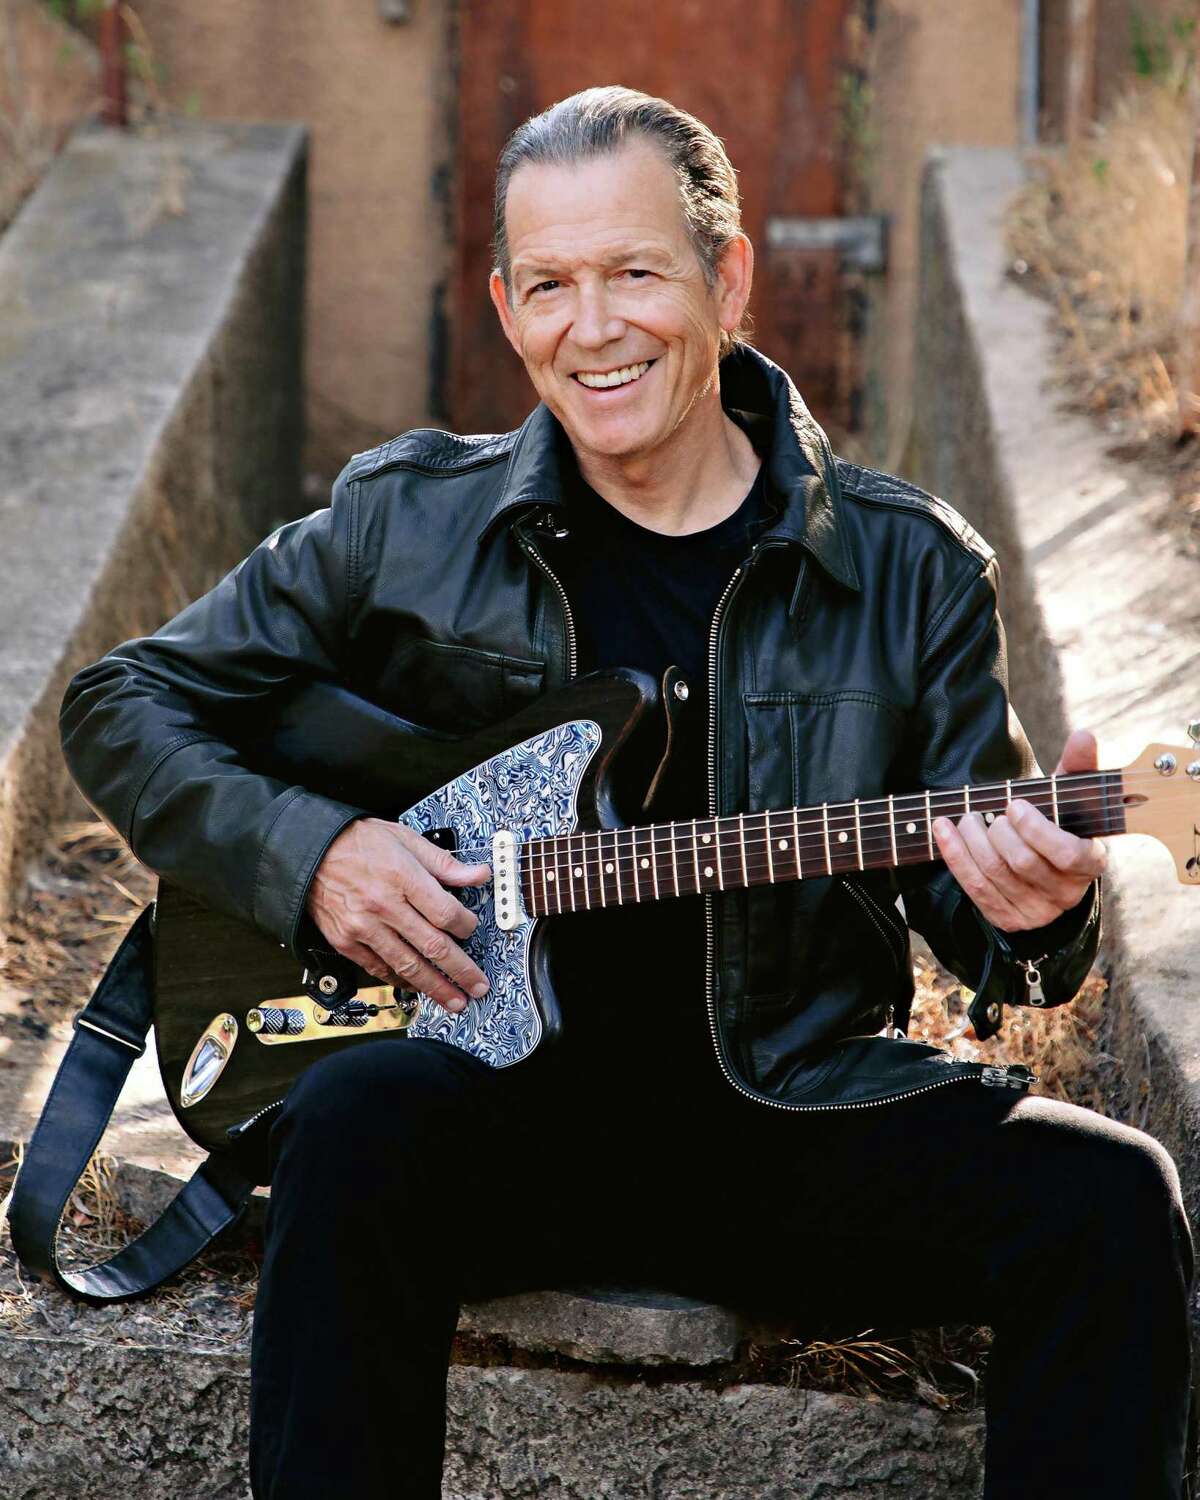 Internationally beloved soul-blues rocker Tommy Castro will celebrate the release of his new album, “ Tommy Castro Presents A Bluesman Came To Town - A Blues Odyssey”, with a show featuring his band, The Painkillers, Nov. 16 at The Kate in Old Saybrook.